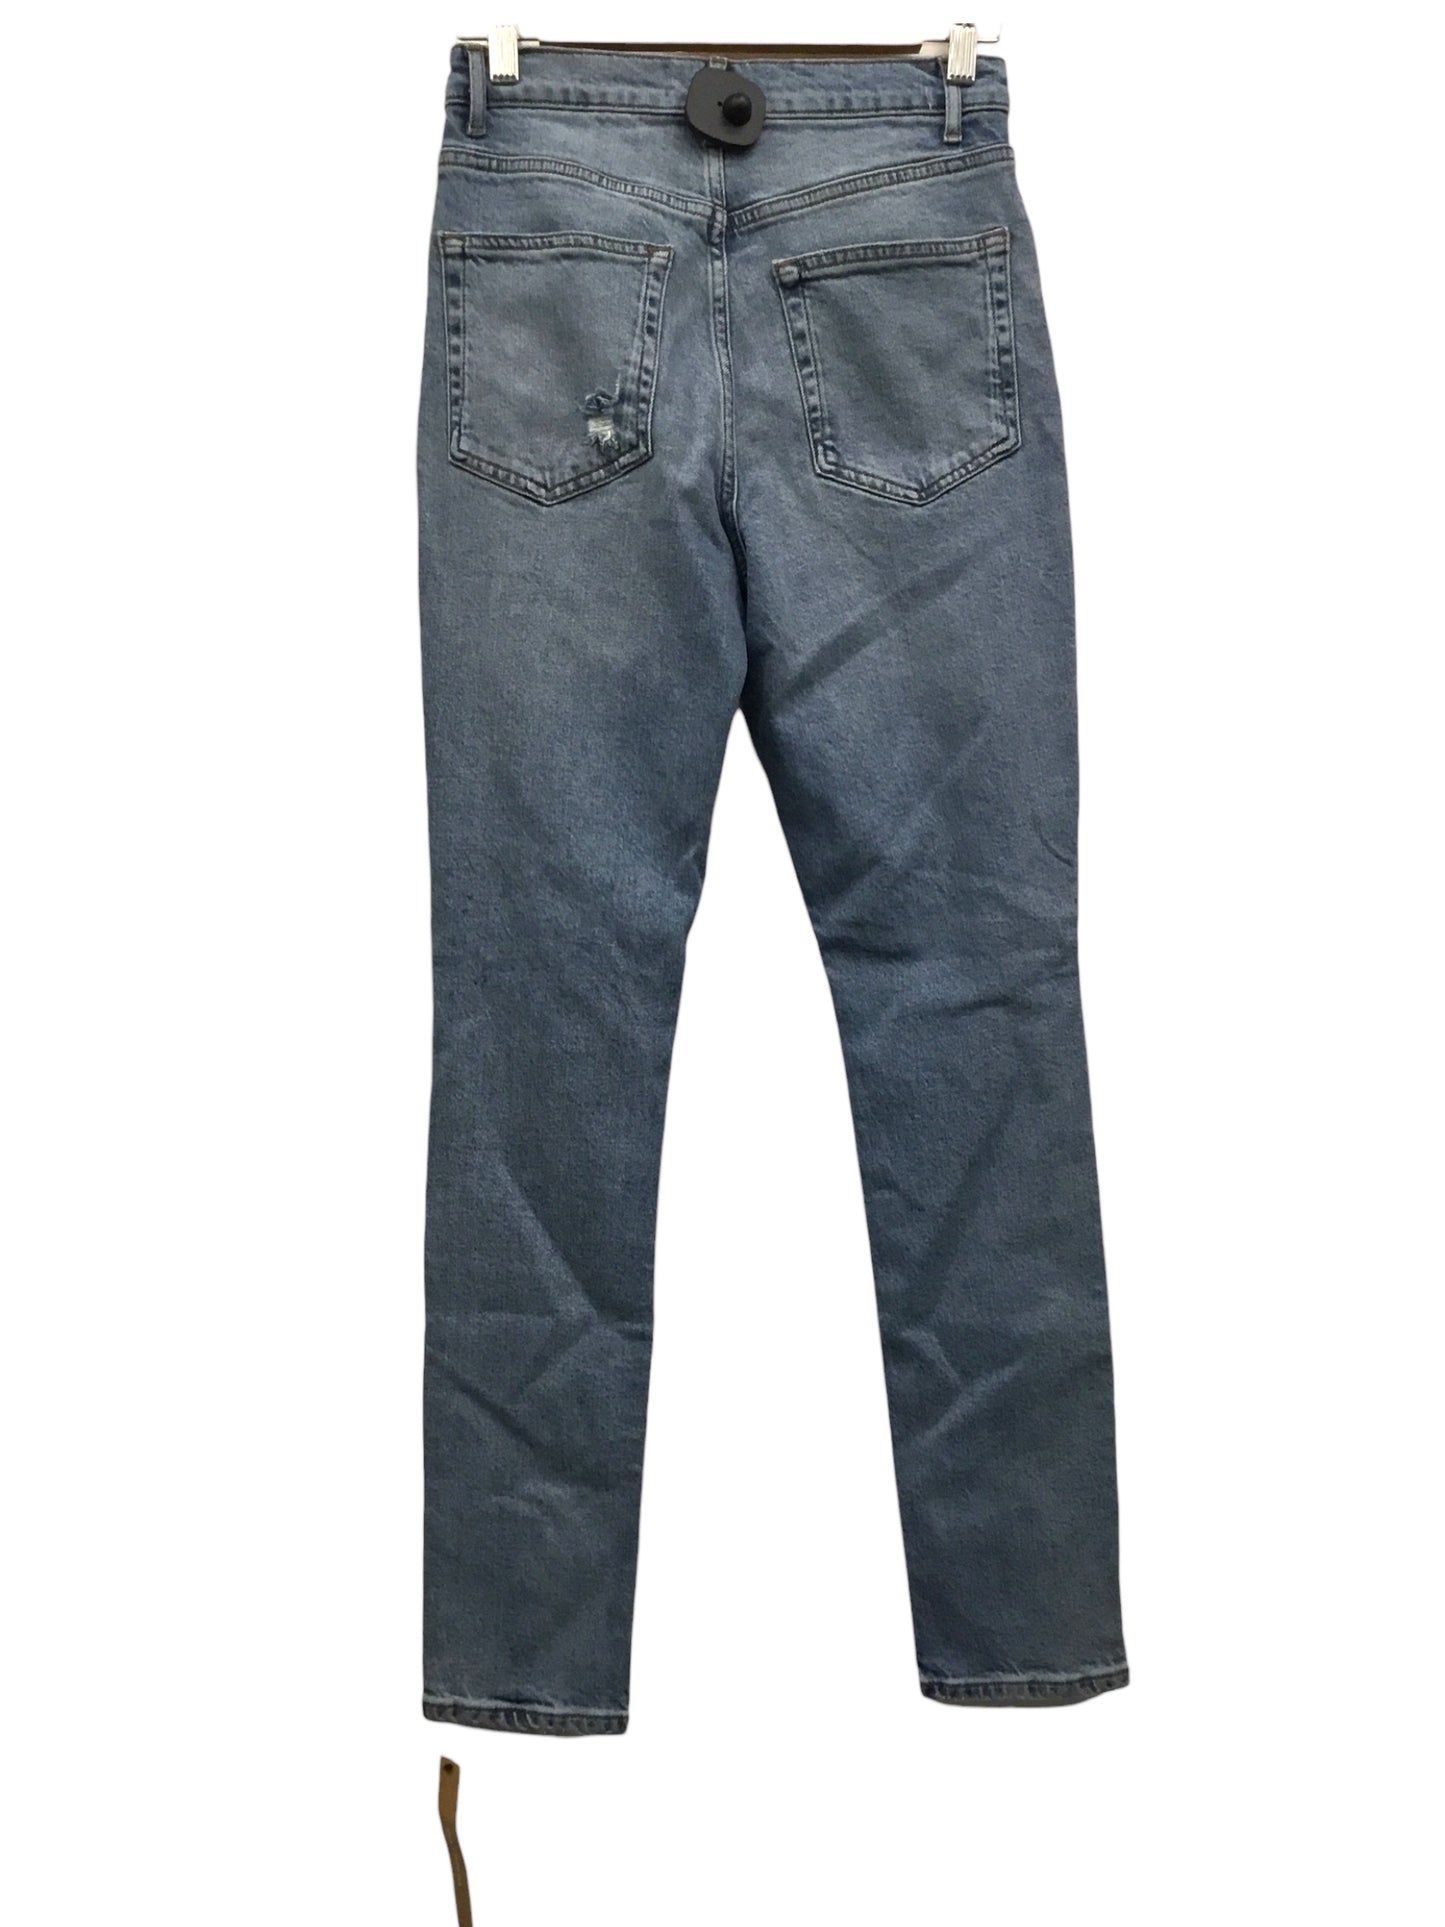 Jeans Skinny By Reformation  Size: 2